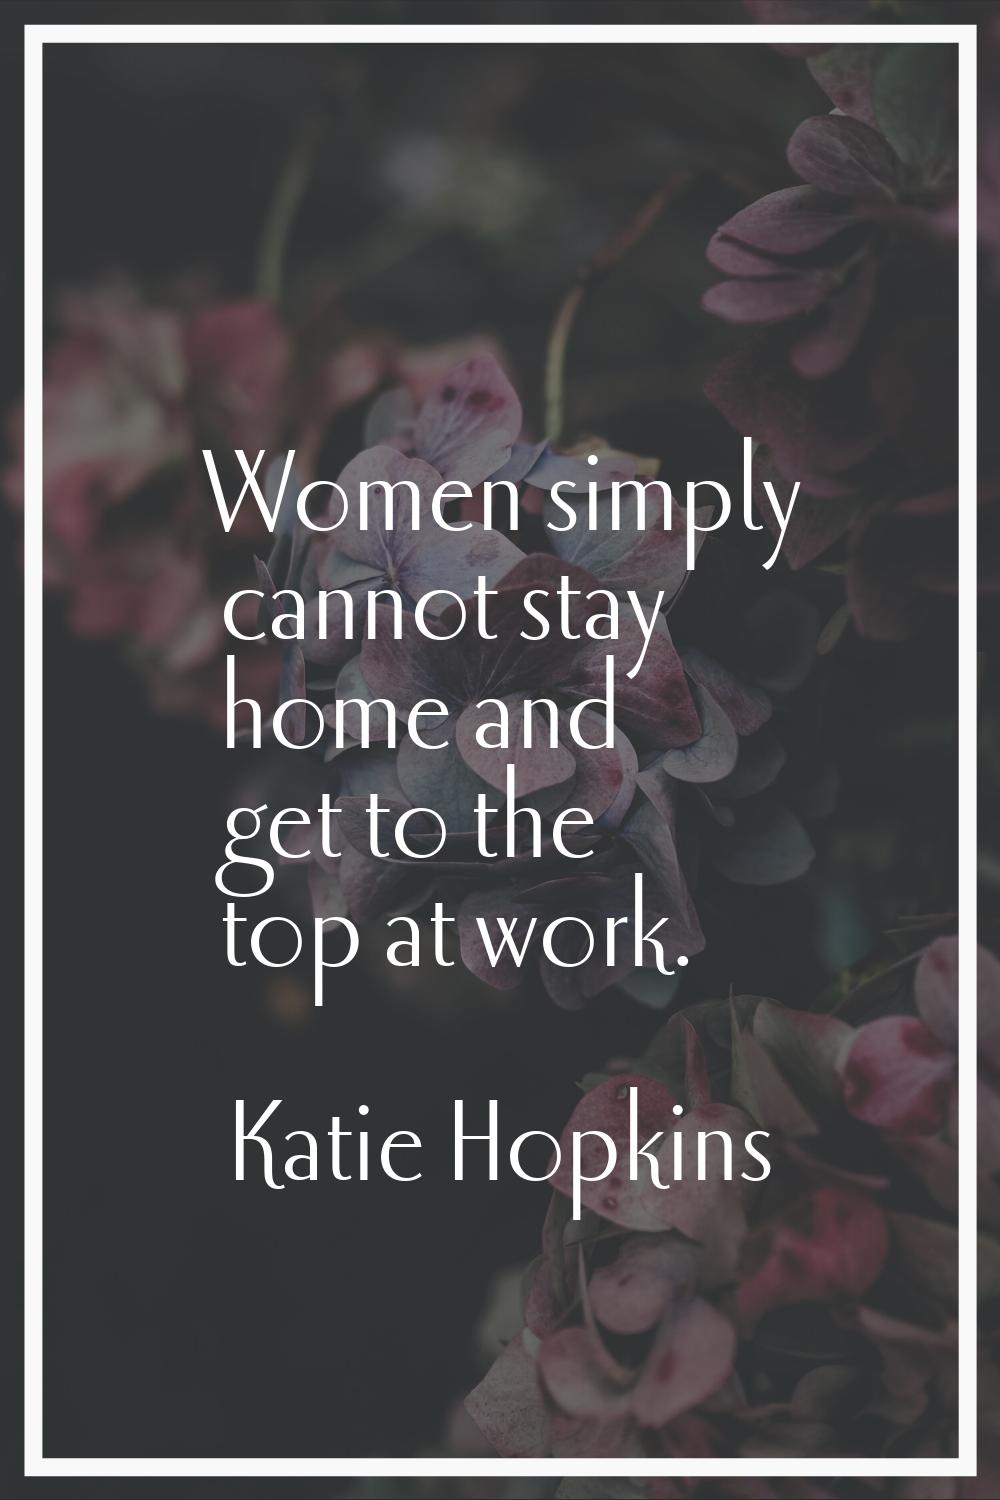 Women simply cannot stay home and get to the top at work.